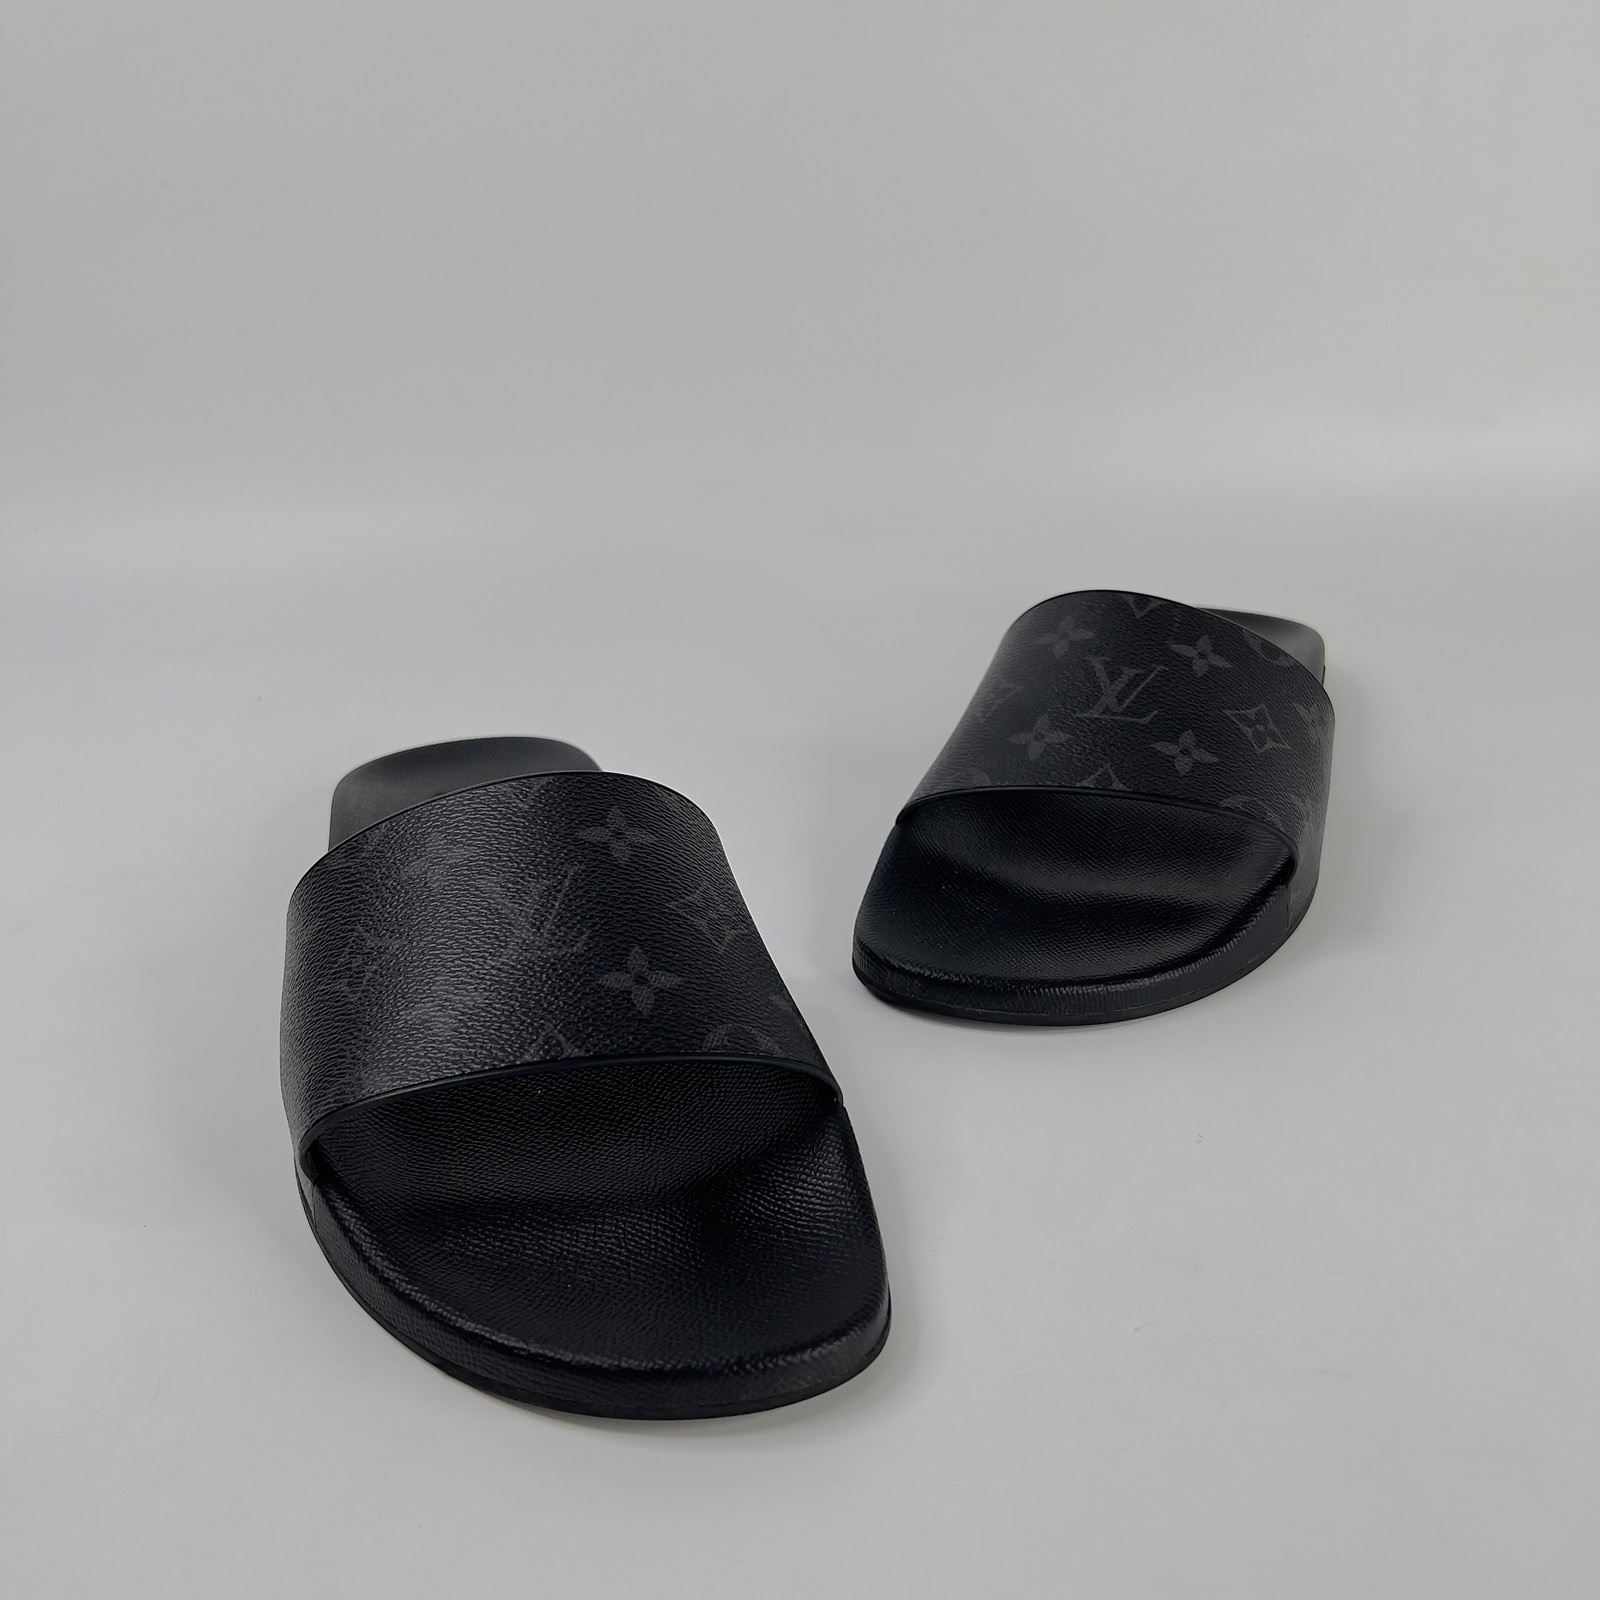 Louis Vuitton Monogram Eclipse Slides. Size 39. Made in Italy. No